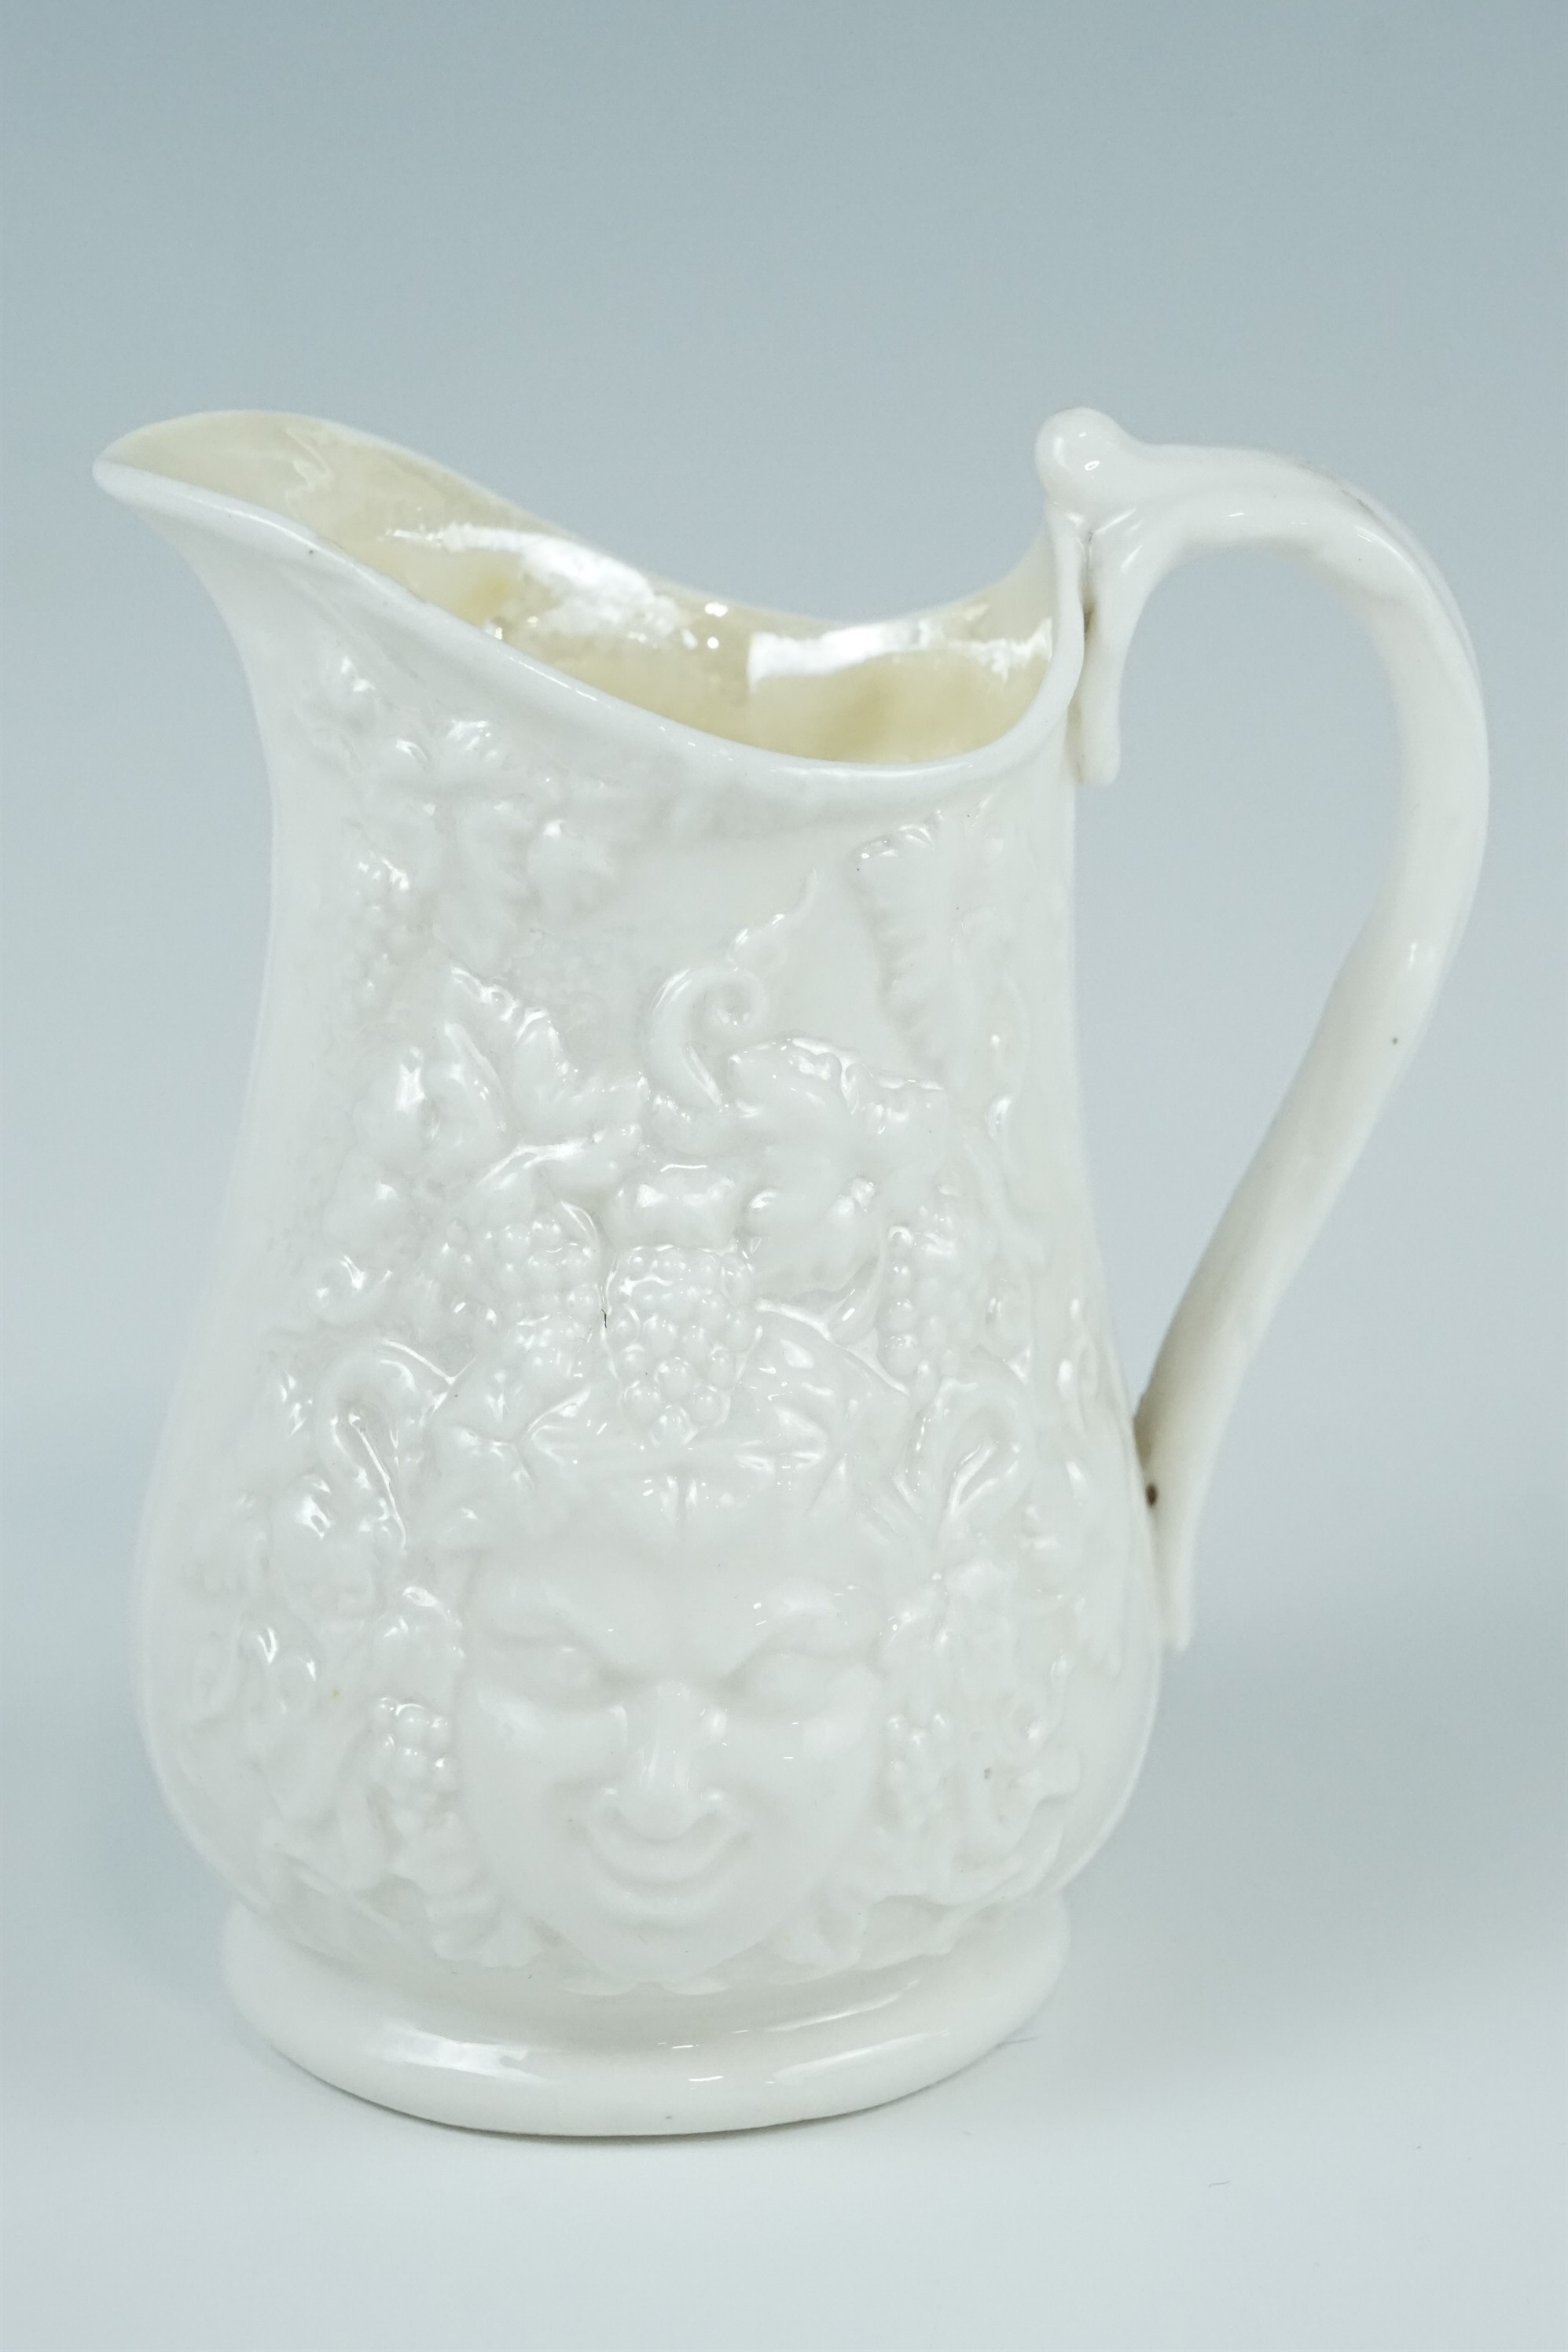 A Belleek cream jug, relief decorated with Bacchus masks and grape vines, (free from damage and